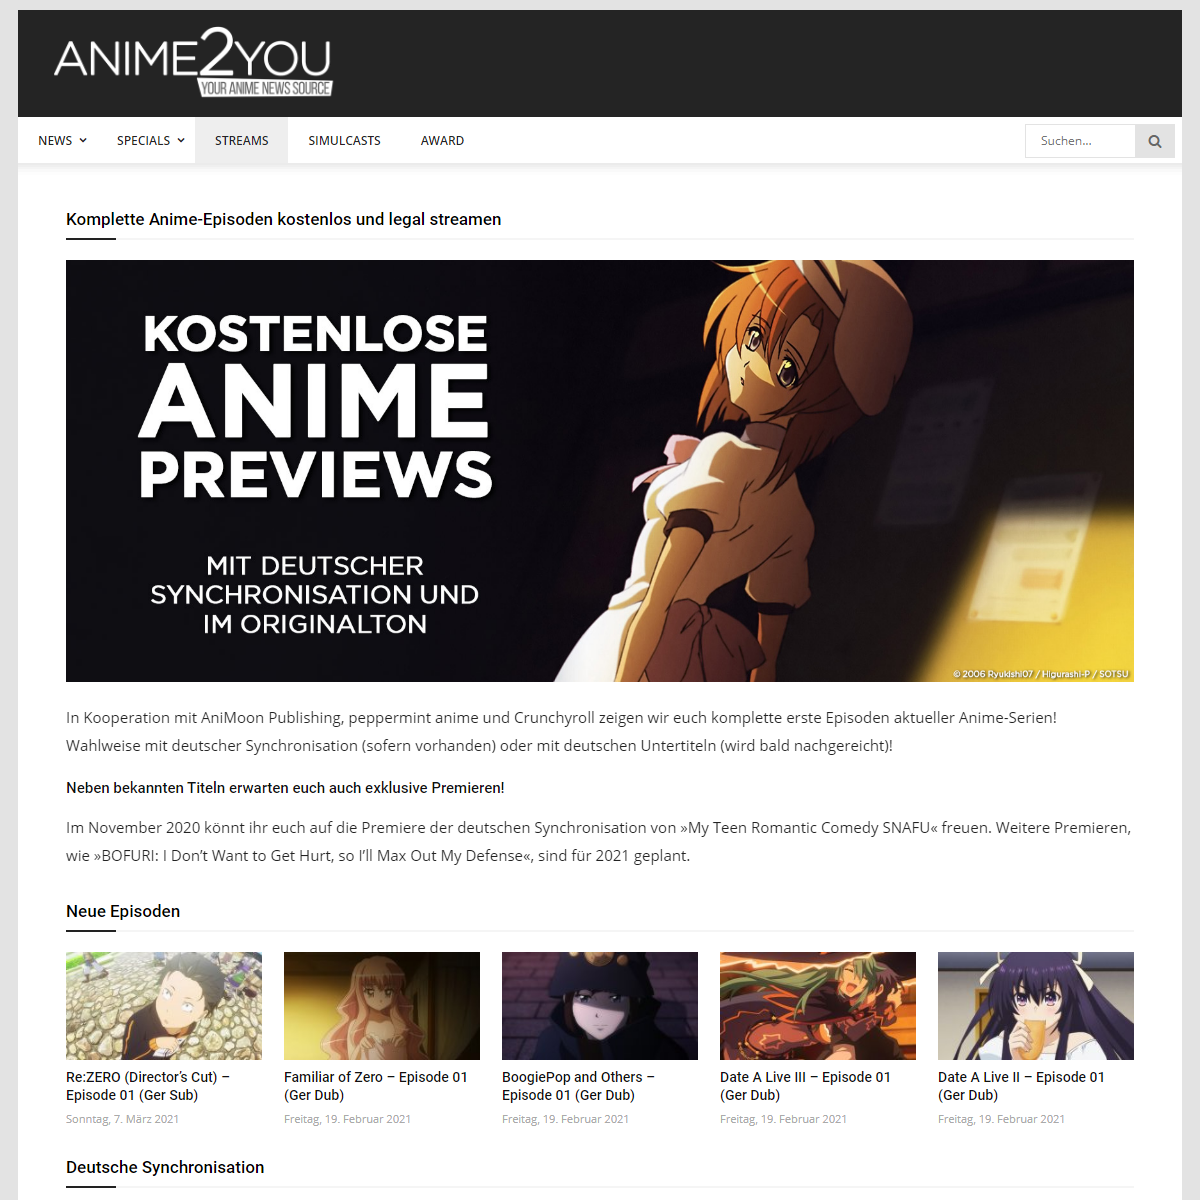 A complete backup of https://www.anime2you.de/streams/